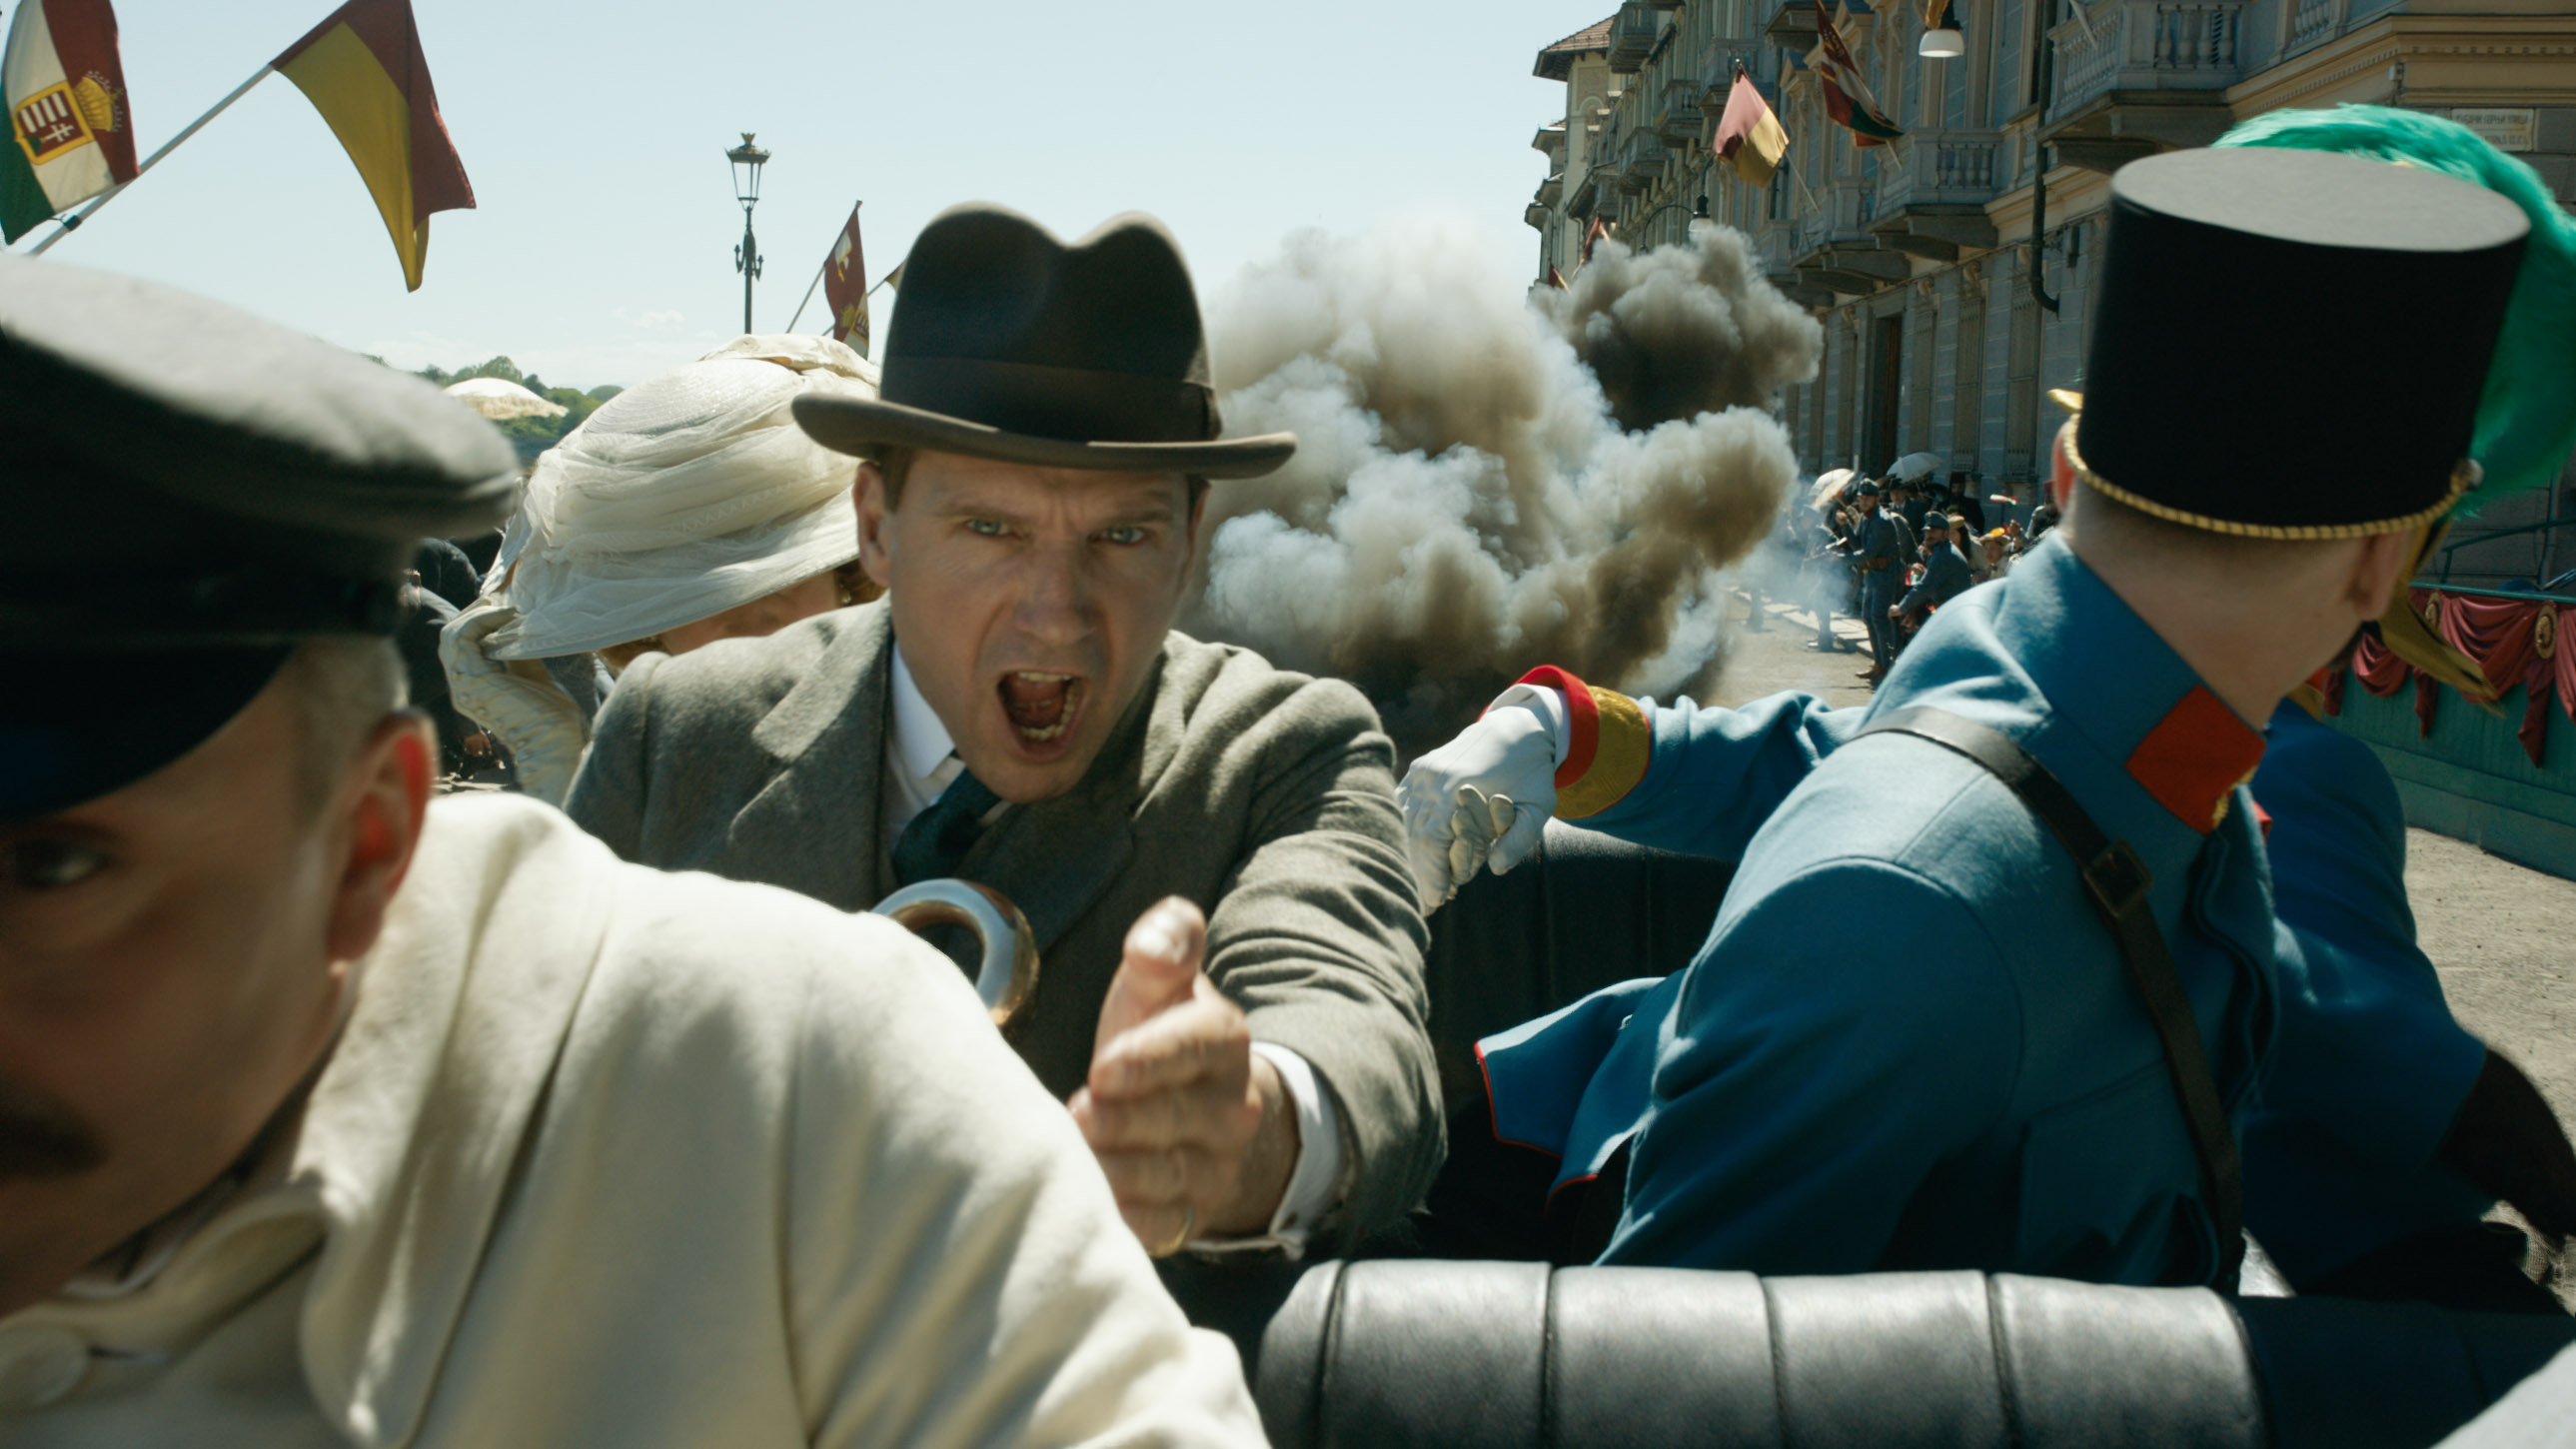 Кінгс Мен  Ralph Fiennes as Oxford in 20th Century Studios’ THE KING’S MAN. Photo Credit: Courtesy of 20th Century Studios. © 2020 Twentieth Century Fox Film Corporation. All Rights Reserved.